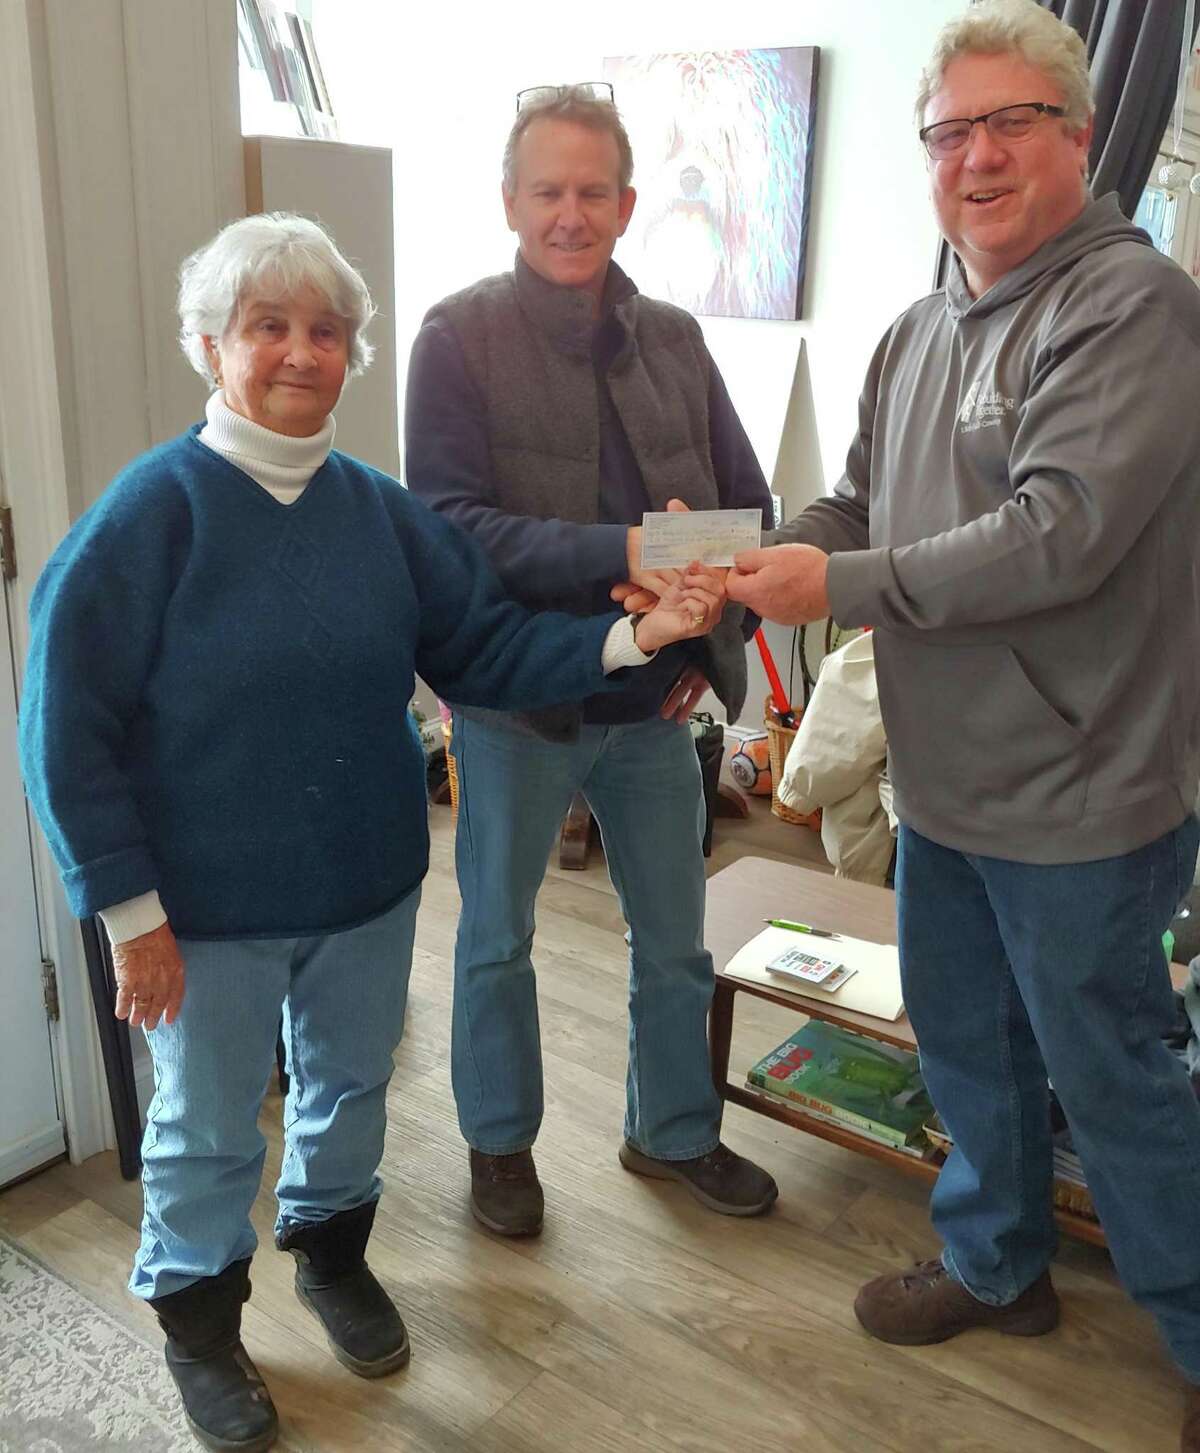 Ceia Webb, left, executive director of Rebuilding Together Litchfield County, accepts a check from Litchfield realtor Steve Schappert, along with Mike Bogues, chairman of the Litchfield County Rebuilding group, right. The funds will help the organization as they plan to repair ten houses in Litchfield County on April 27. The group has helped with important home repairs that contribute to warmth and safety for senior citizens, serving 241 applicants and 387 persons over the past 15 years. For more information about the group (volunteers are needed), email info@rebuildingtogetherlitchfield.org or call 860-350-2290.